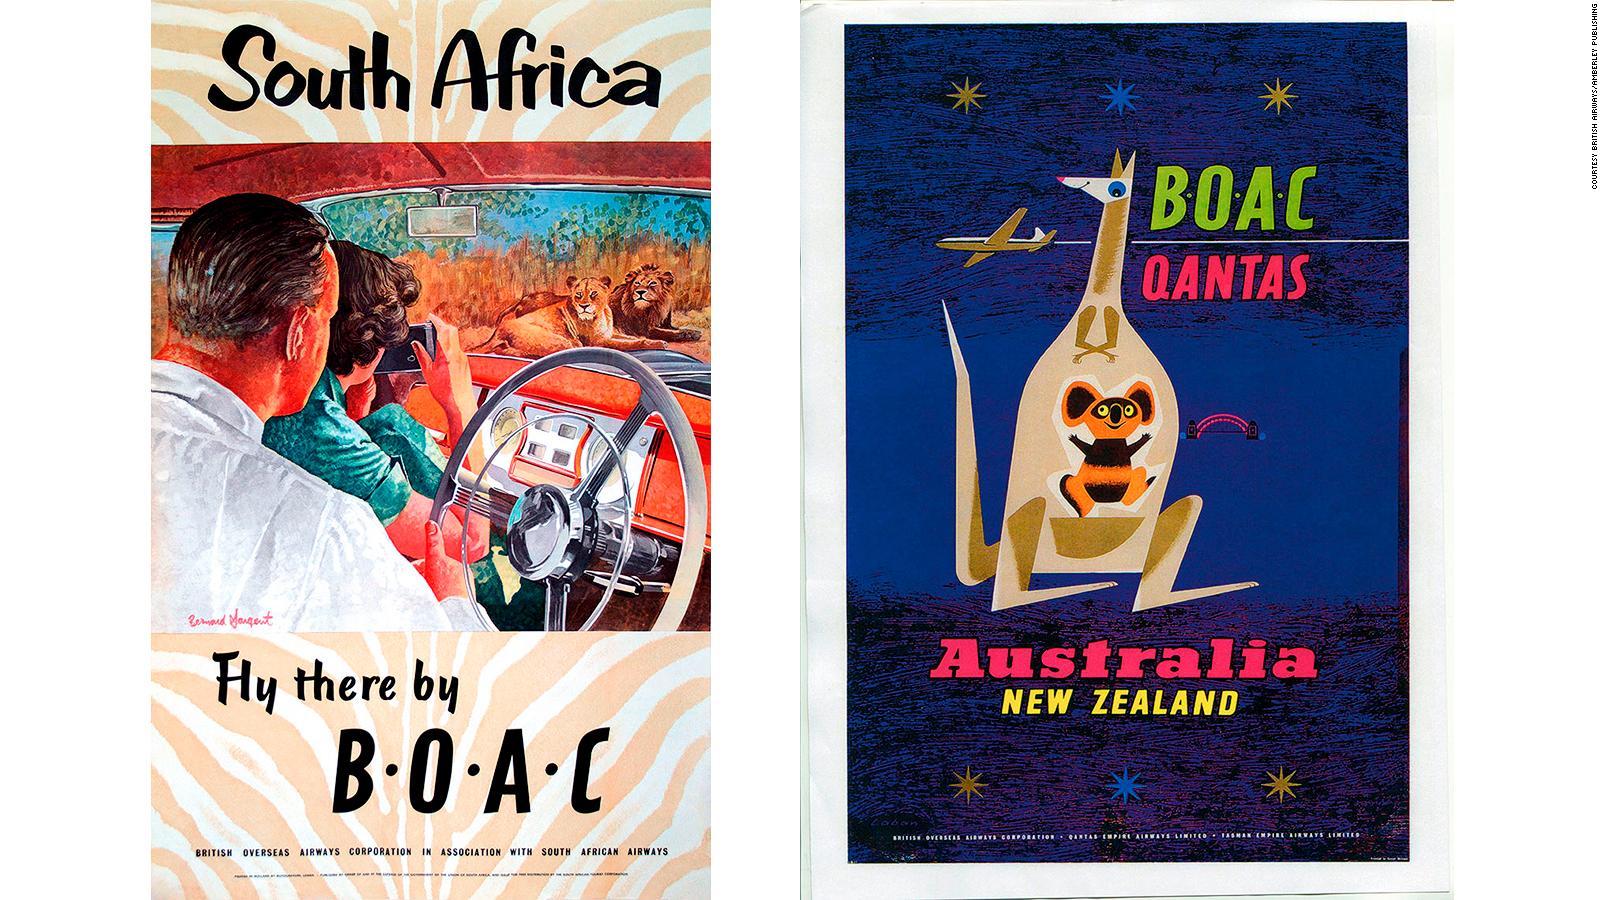 British Airways posters celebrate the golden age of air travel | CNN Travel